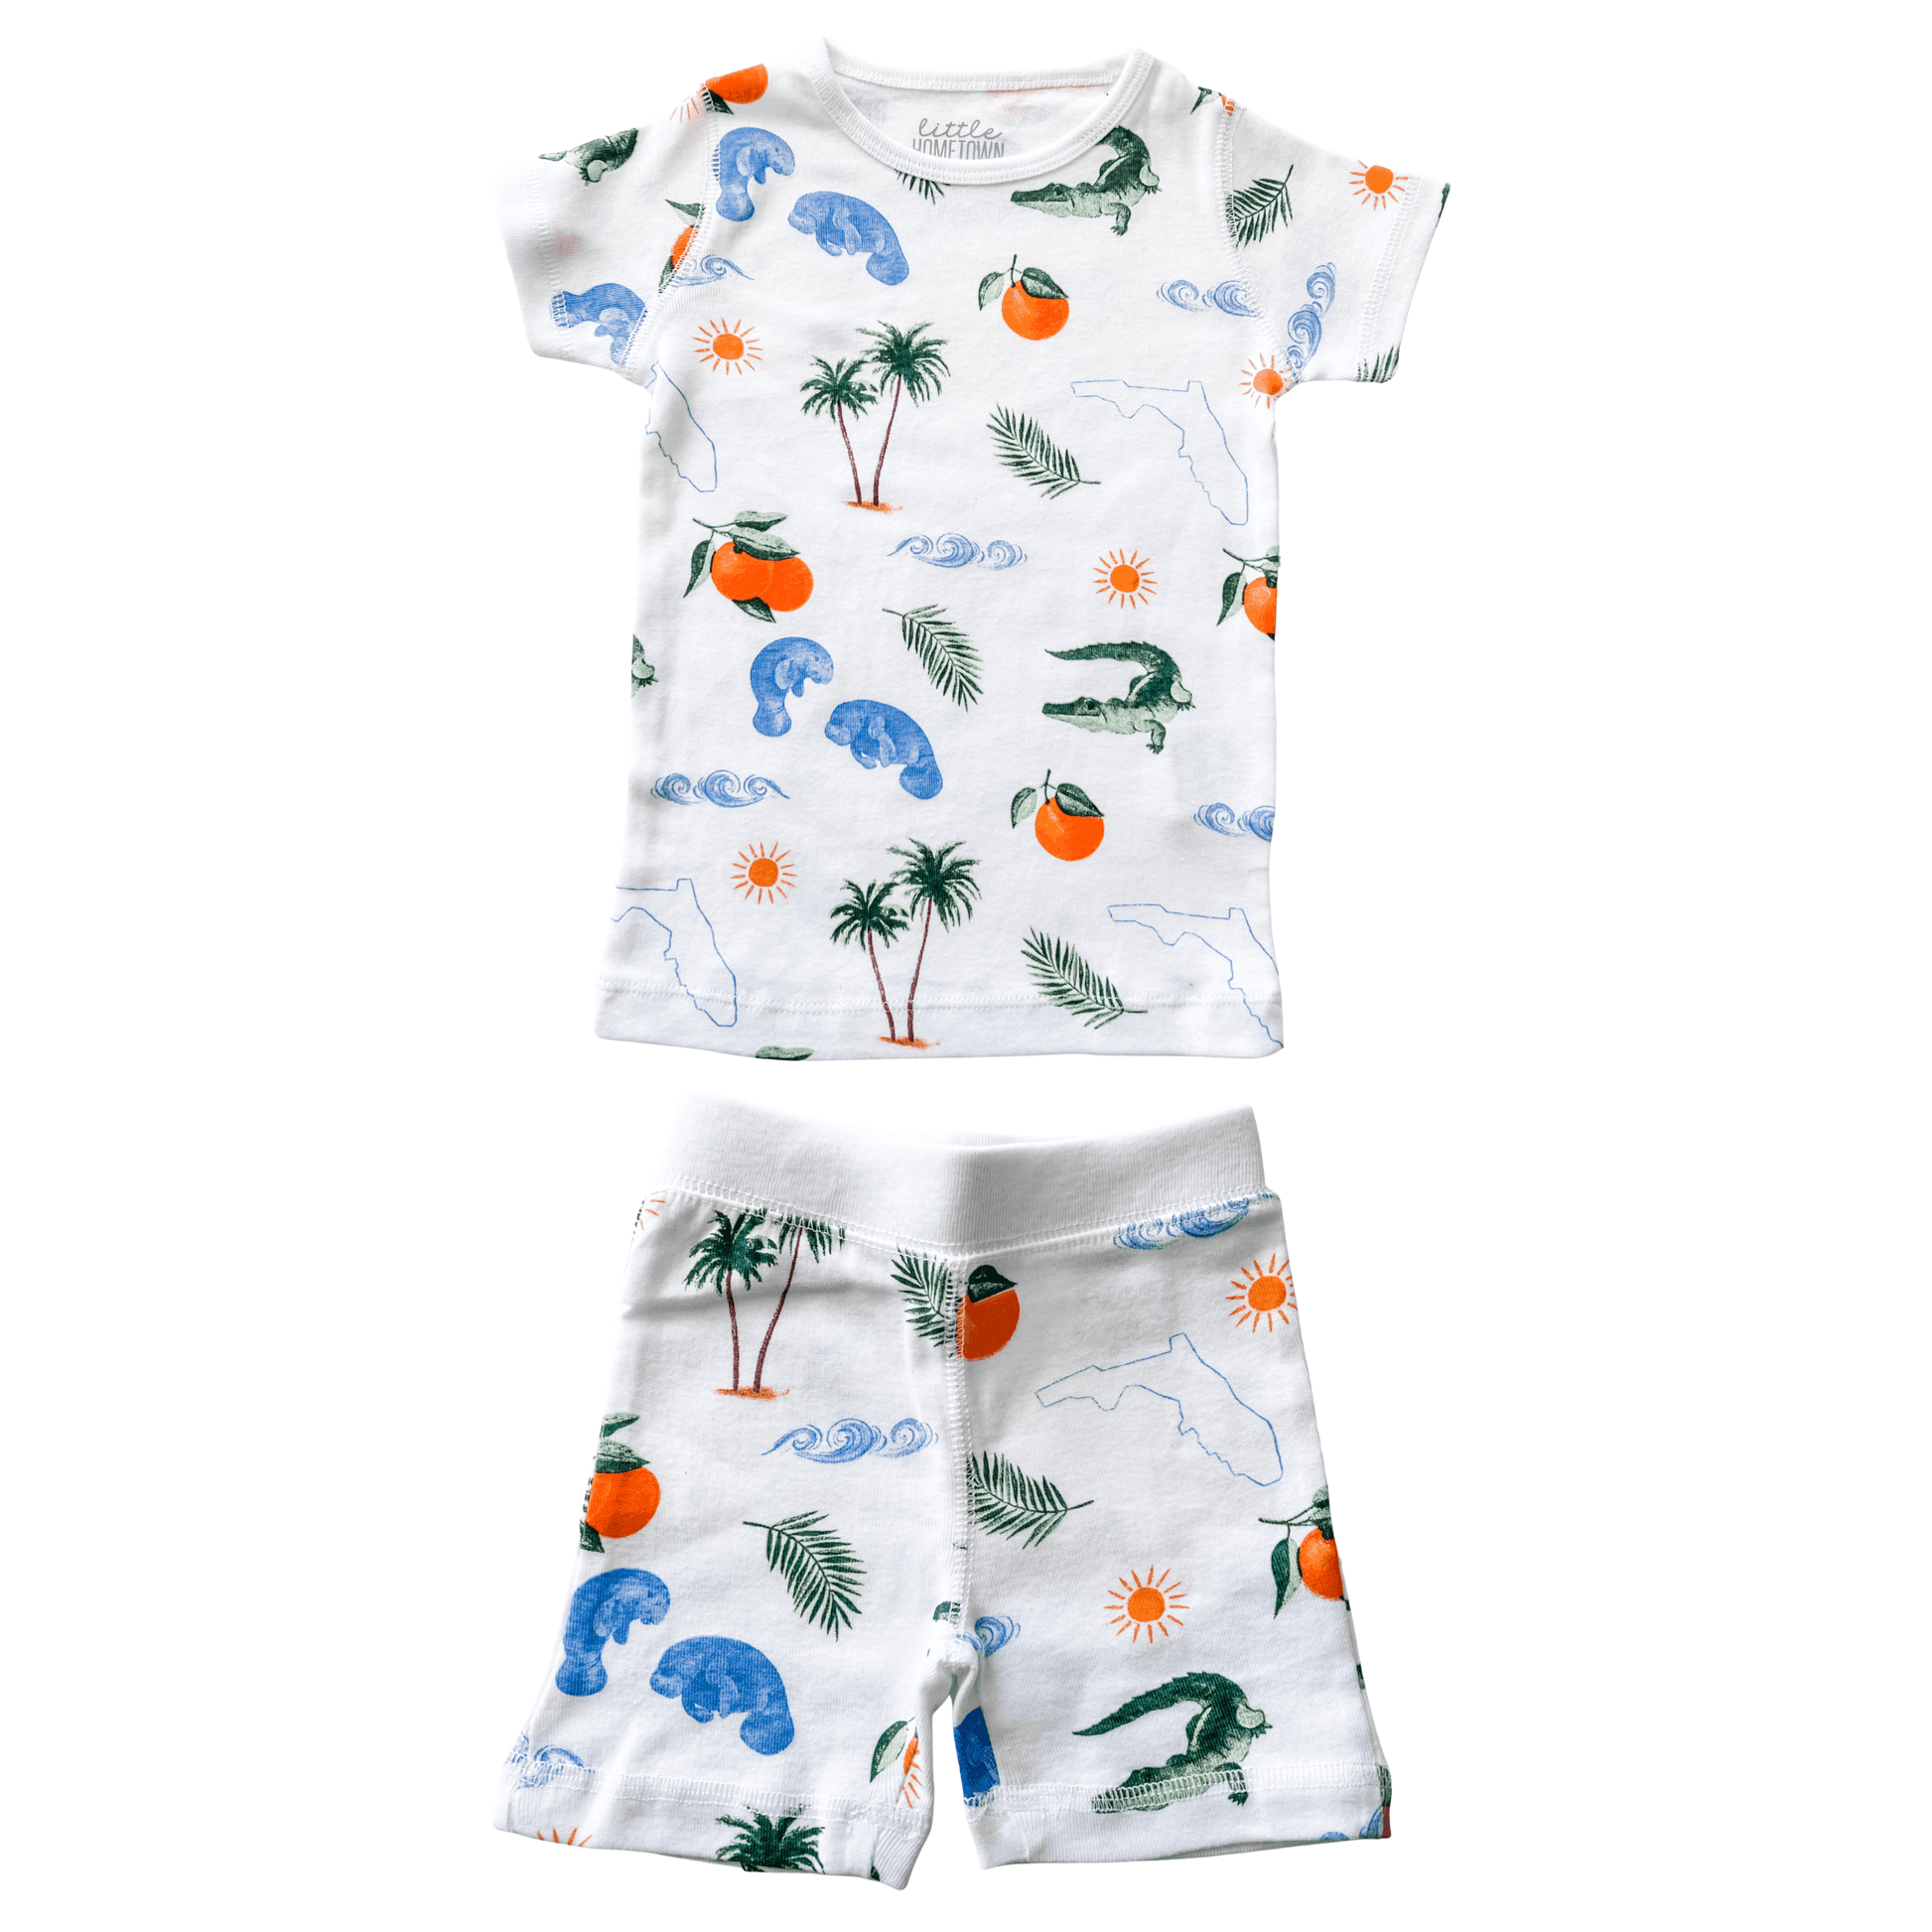 Child's pajamas with Florida-themed illustrations, including oranges, flamingos, and palm trees on a white background.